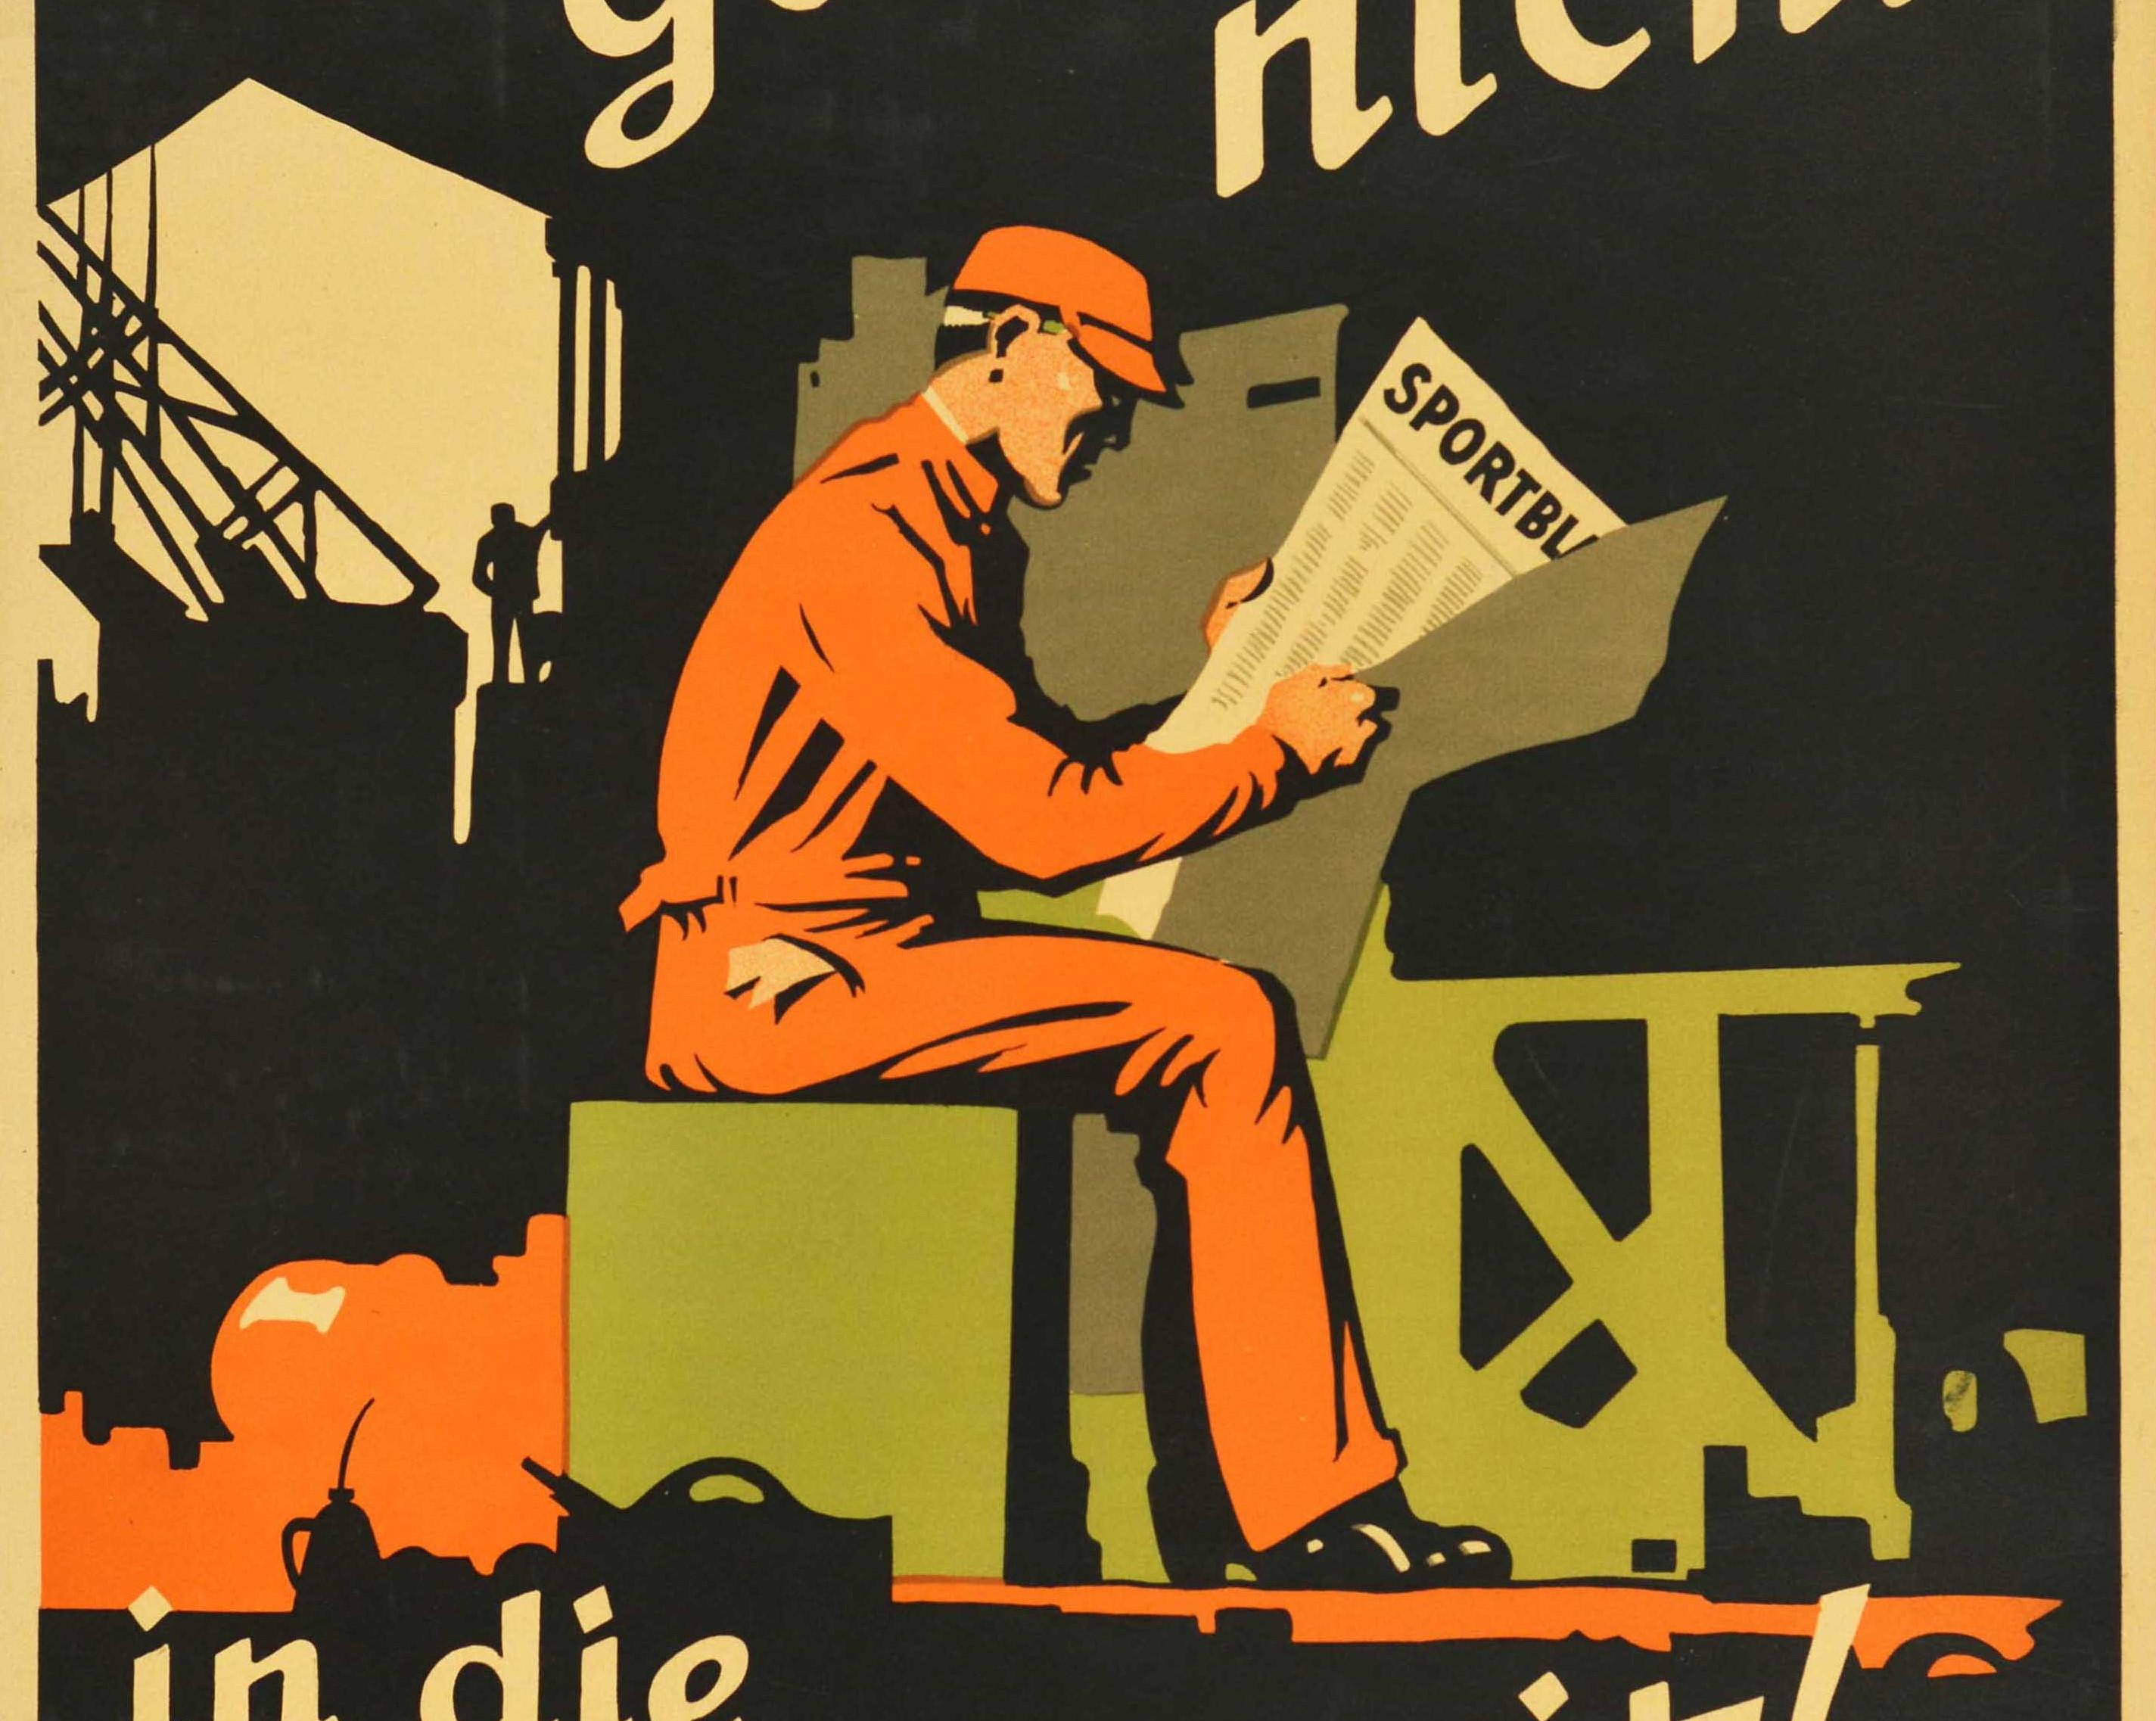 Original vintage German motivational workplace poster issued by the Parker-Holladay company in Berlin featuring an illustration of a worker reading the sports pages of a newspaper in an industrial factory with the quote on the black background - Das